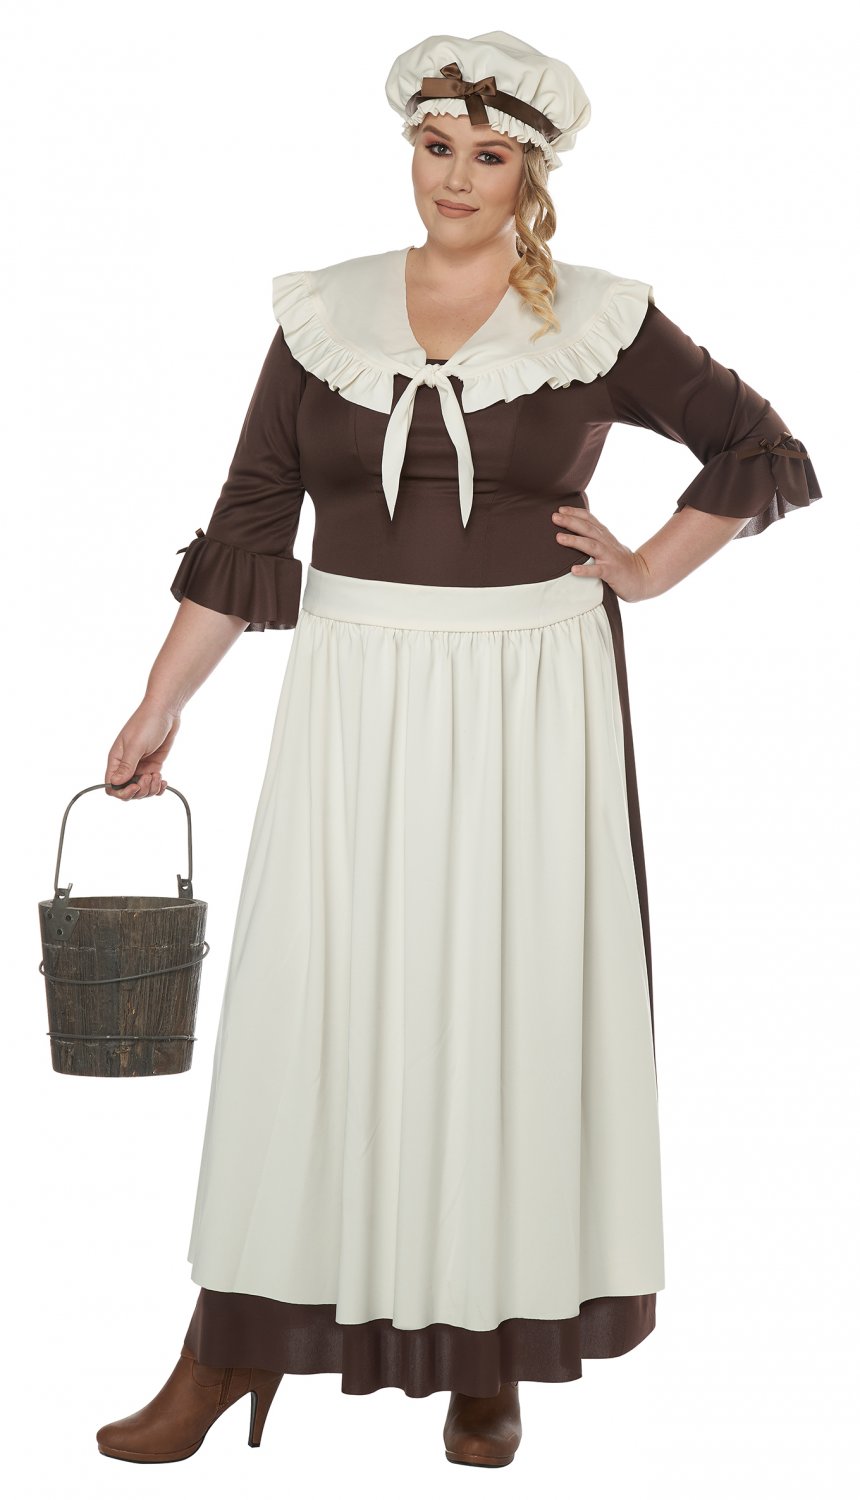 Plus Size 1xl 01752 Colonial Village Pioneer Woman Adult Costume 7756